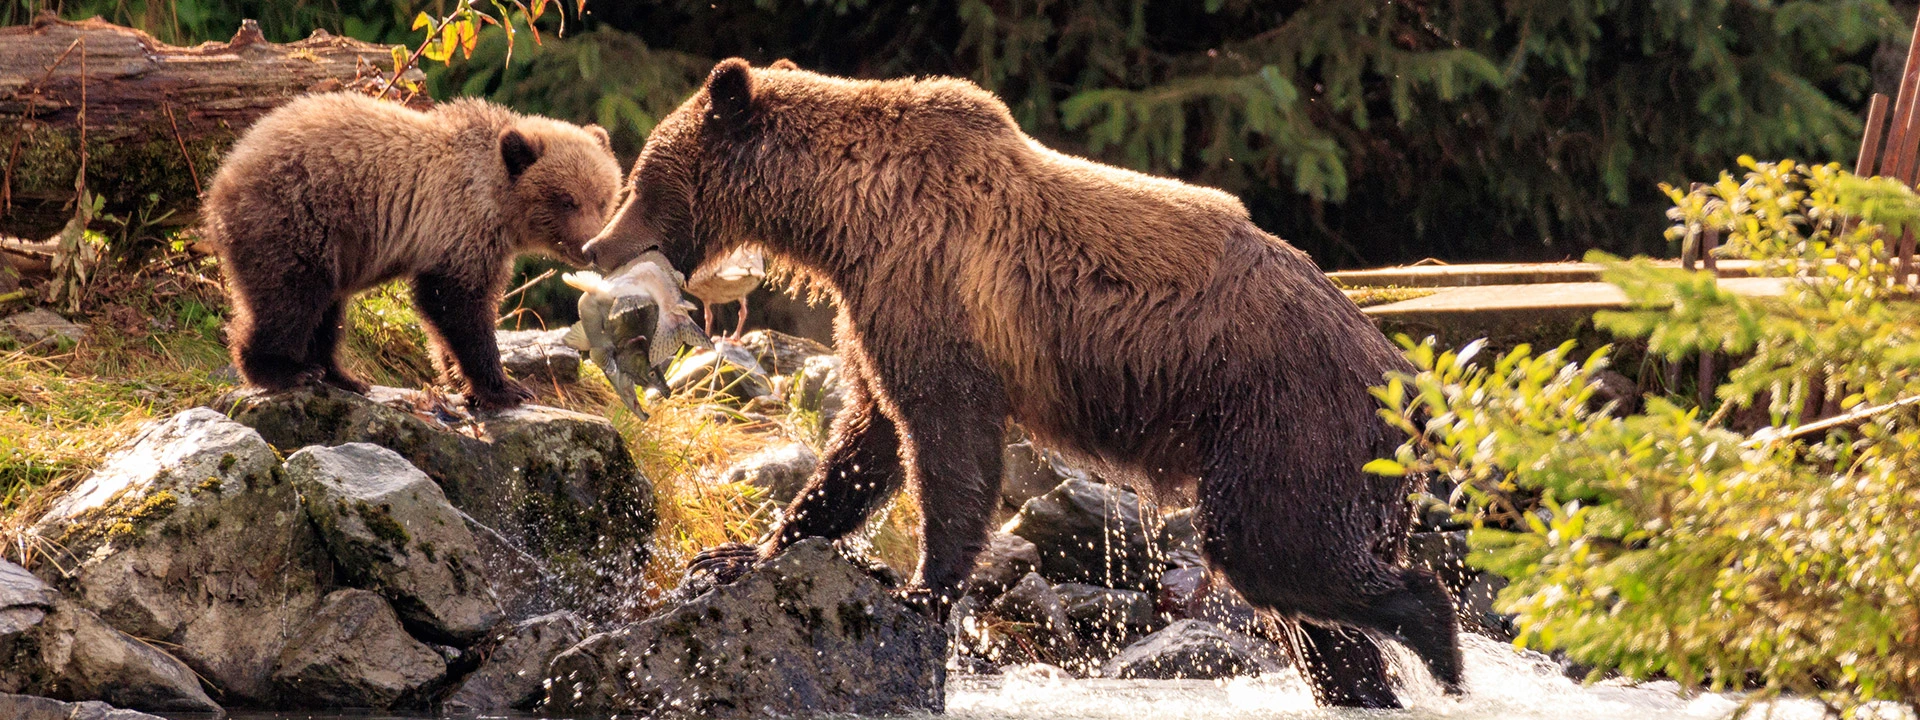 grizzly bear and cub salmon fishing in Alaska